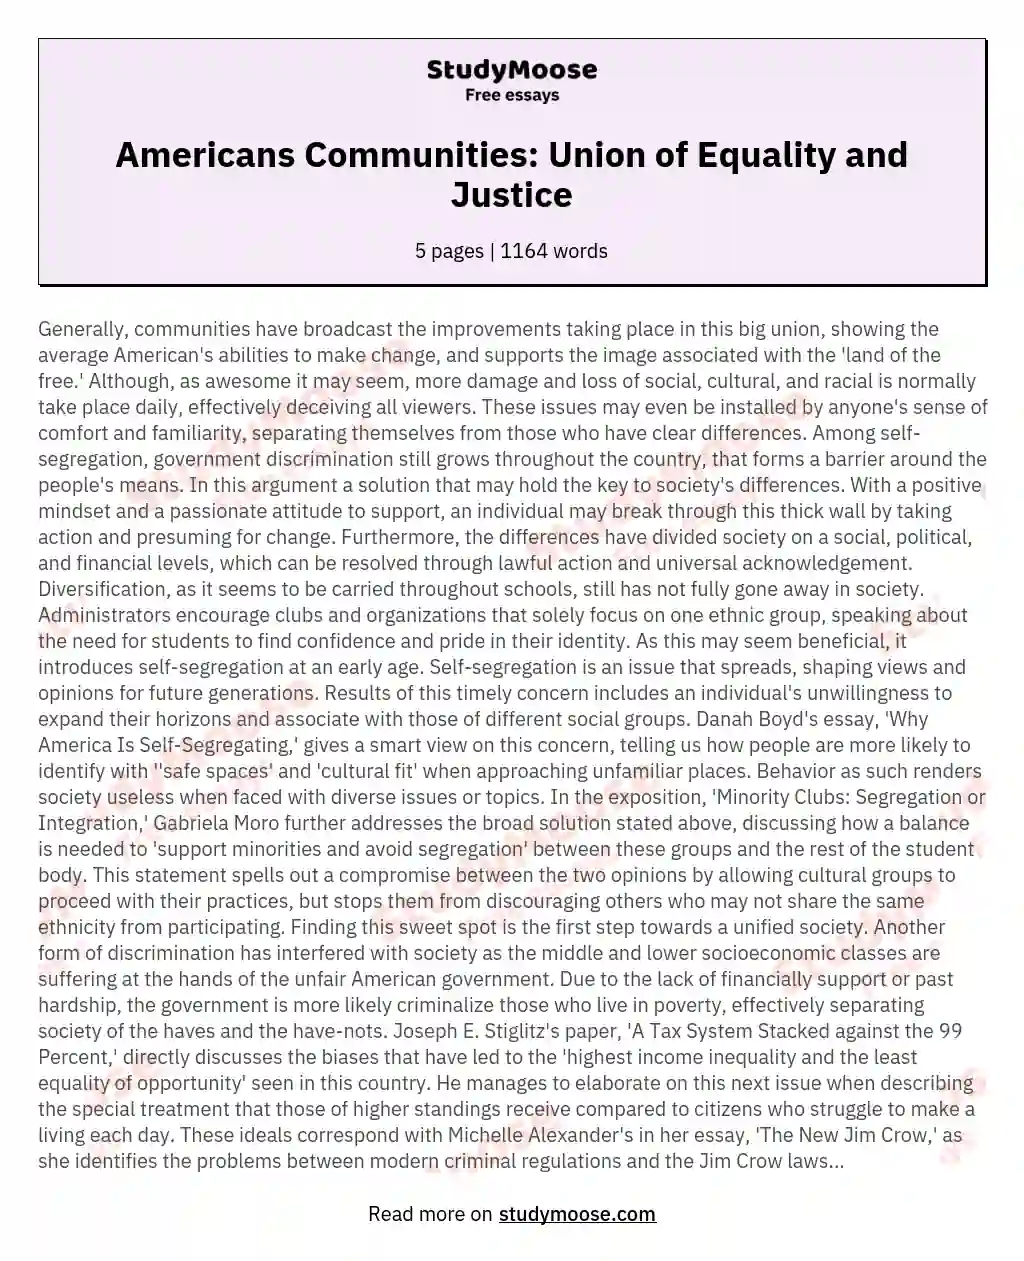 Americans Communities: Union of Equality and Justice essay